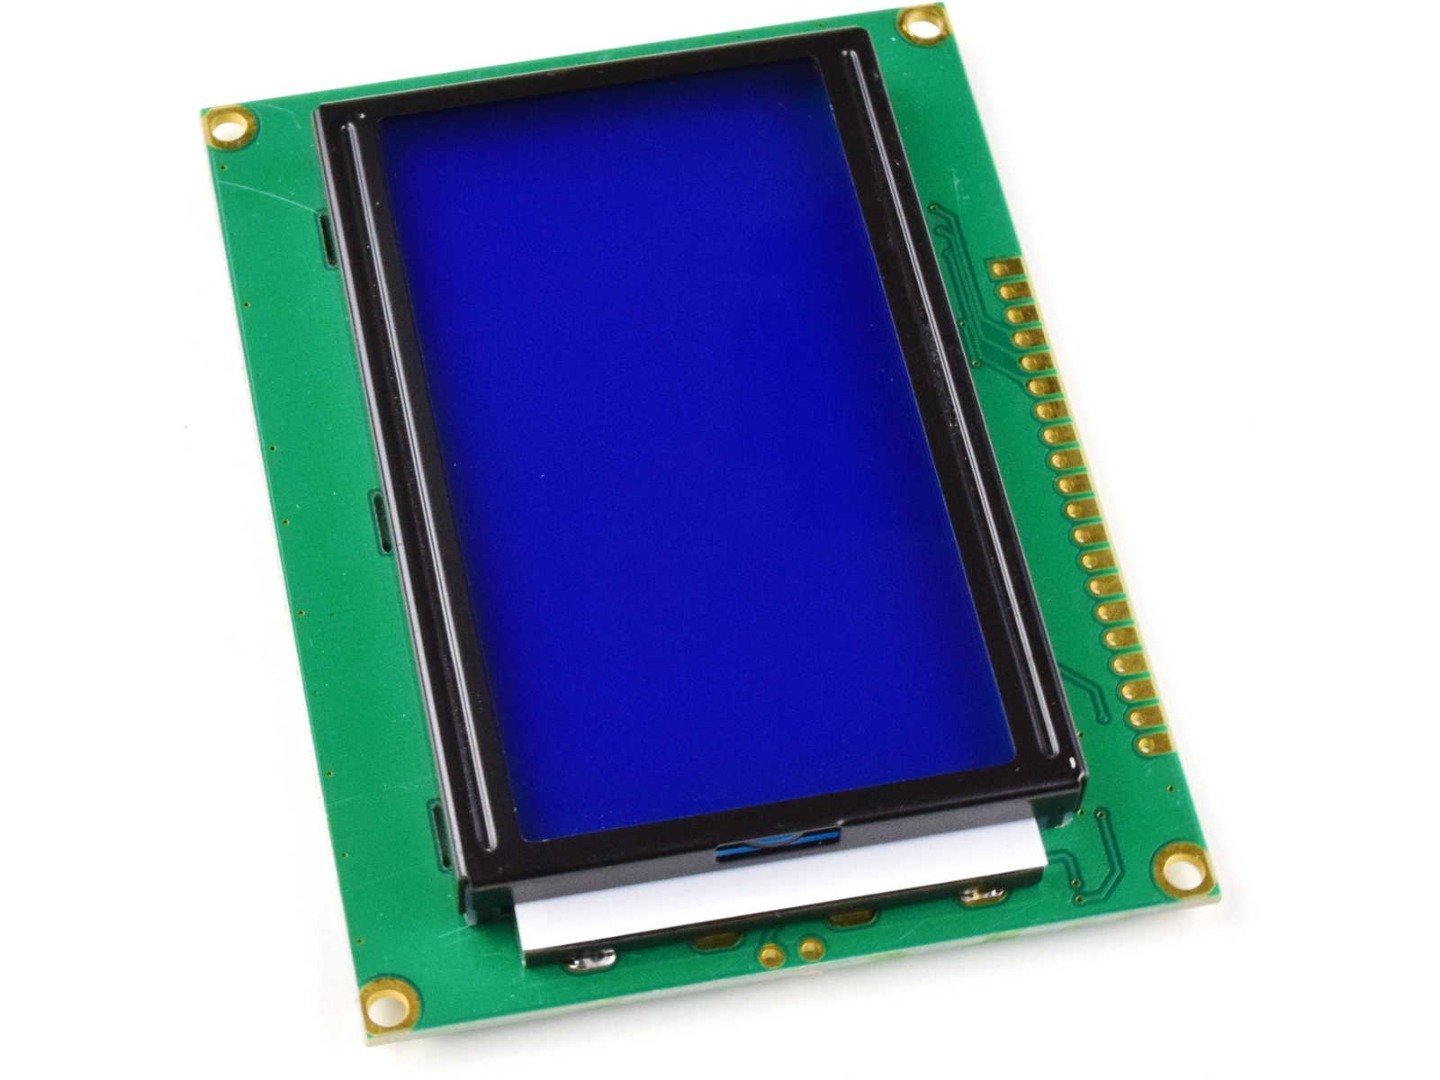 LCD12864 128×64 Graphic Display, blue/white, ST7920 8